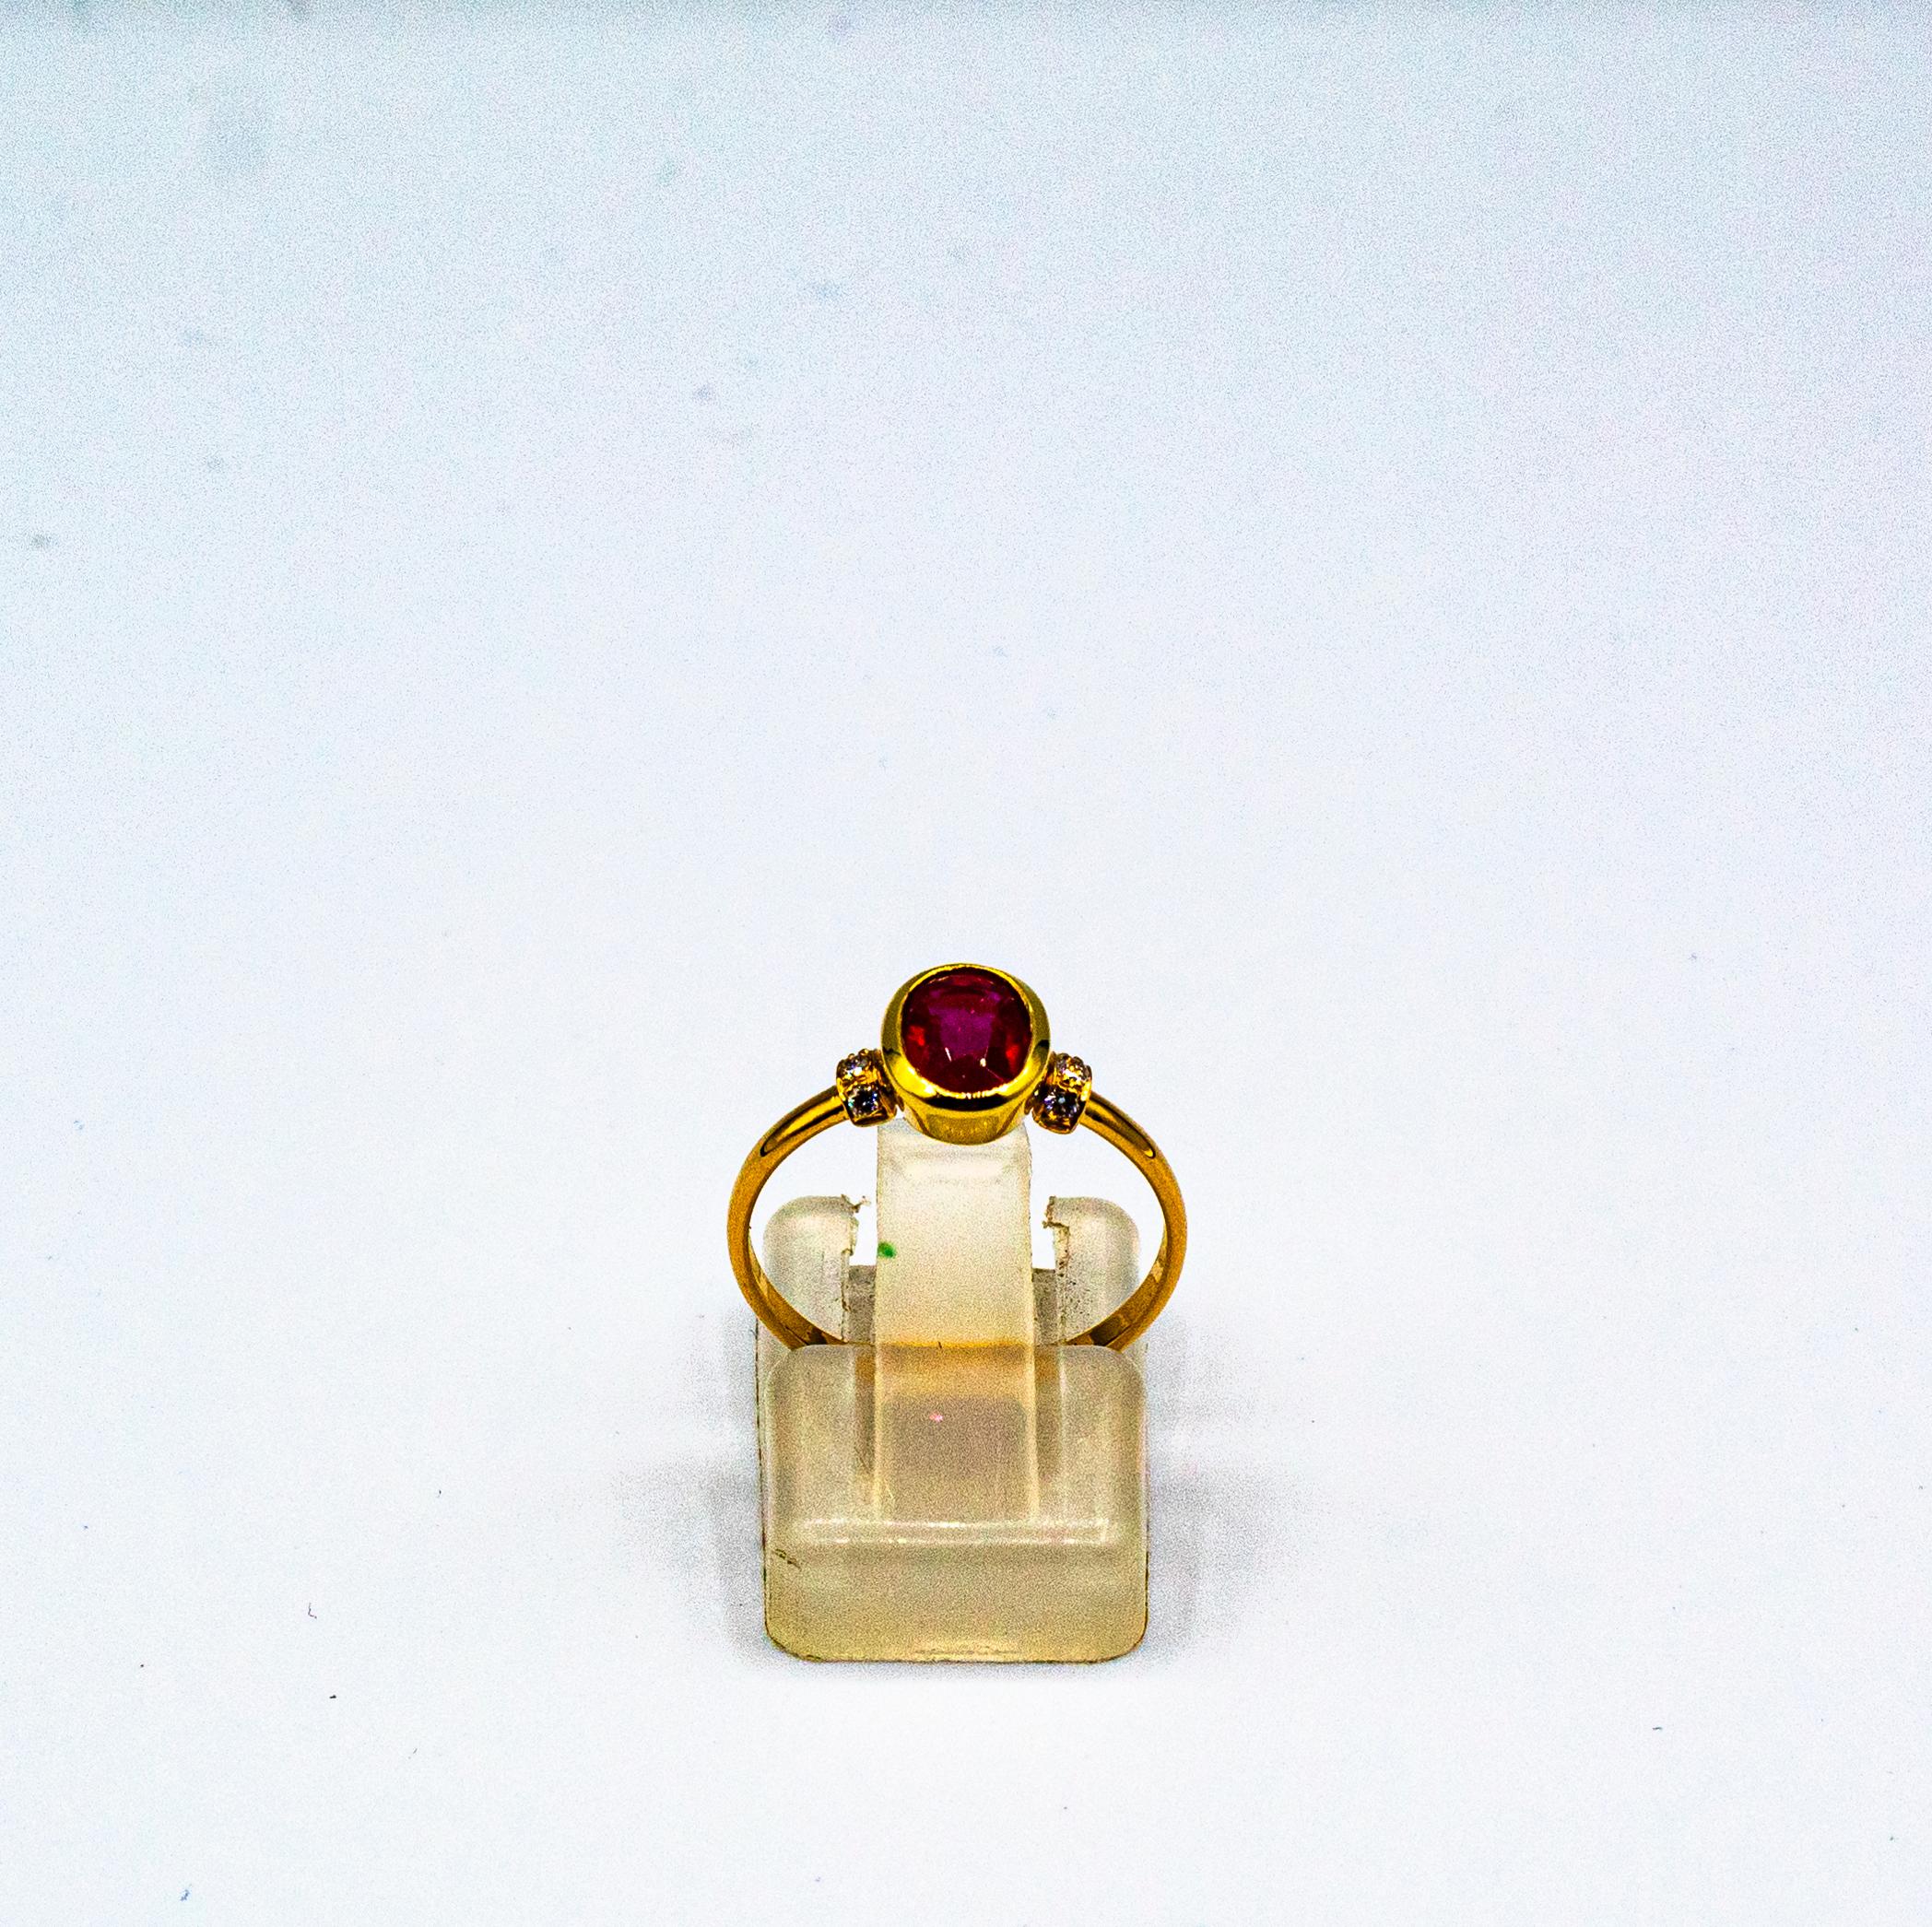 This Ring is made of 18K Yellow Gold.
This Ring has 0.06 Carats of White Brilliant Cut Diamonds.
This Ring has a 1.00 Carats Oval Cut Ruby.
This Ring is inspired by Art Deco.

Size ITA: 10 USA: 5 1/4

We're a workshop so every piece is handmade,